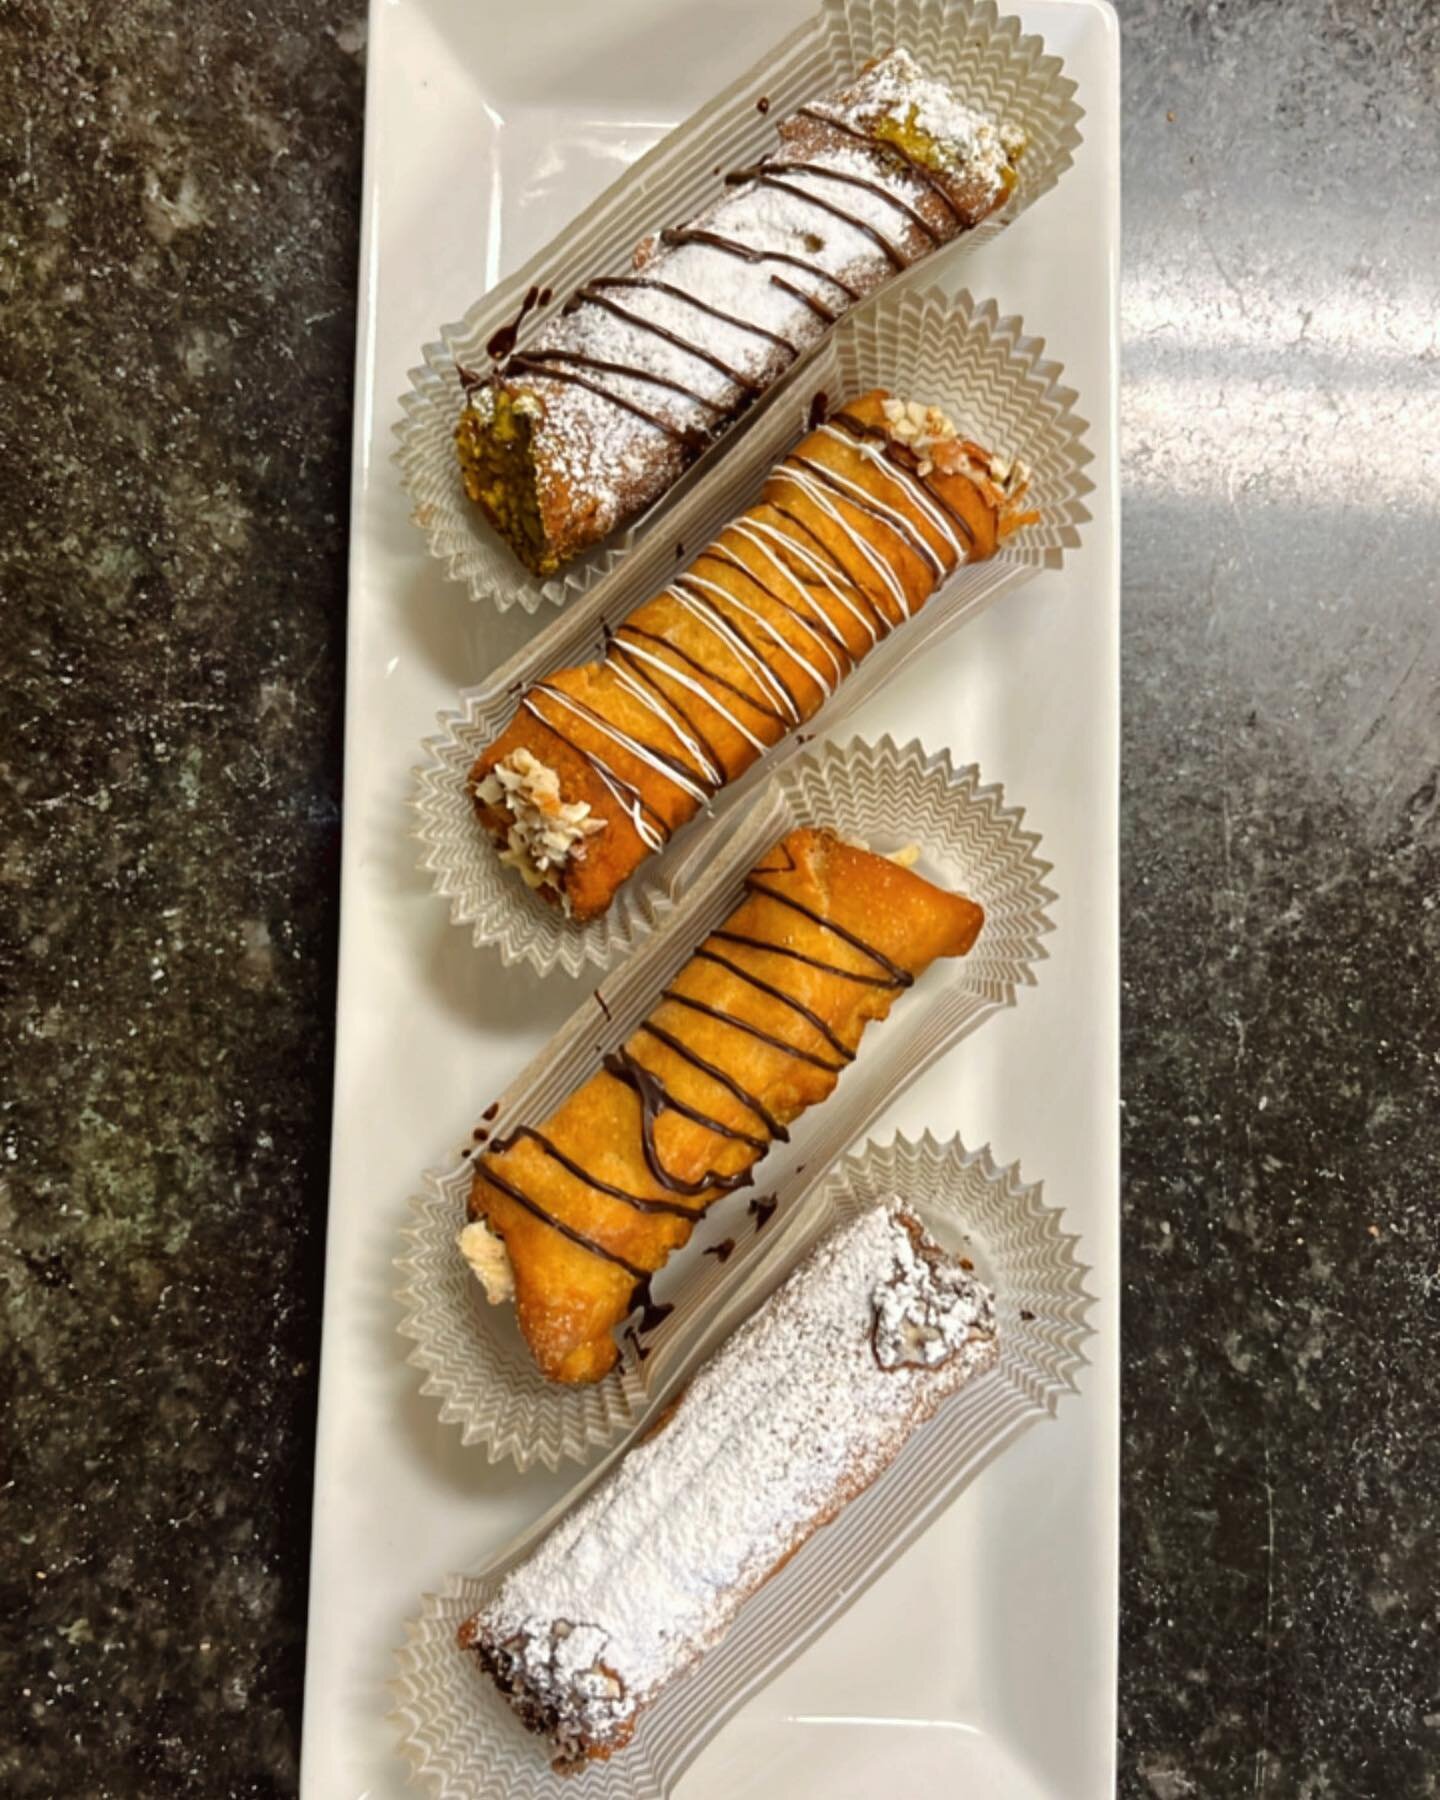 Our bakers are serving goods this week 😁 have a piece of Italy in each bite with our new cannoli flavours! We got almond , pistachio, hazelnut and chocolate in store 🤤
#cannoli #chocolate #pistacchio #almond #orangepeel #italianfood #italiandelicat